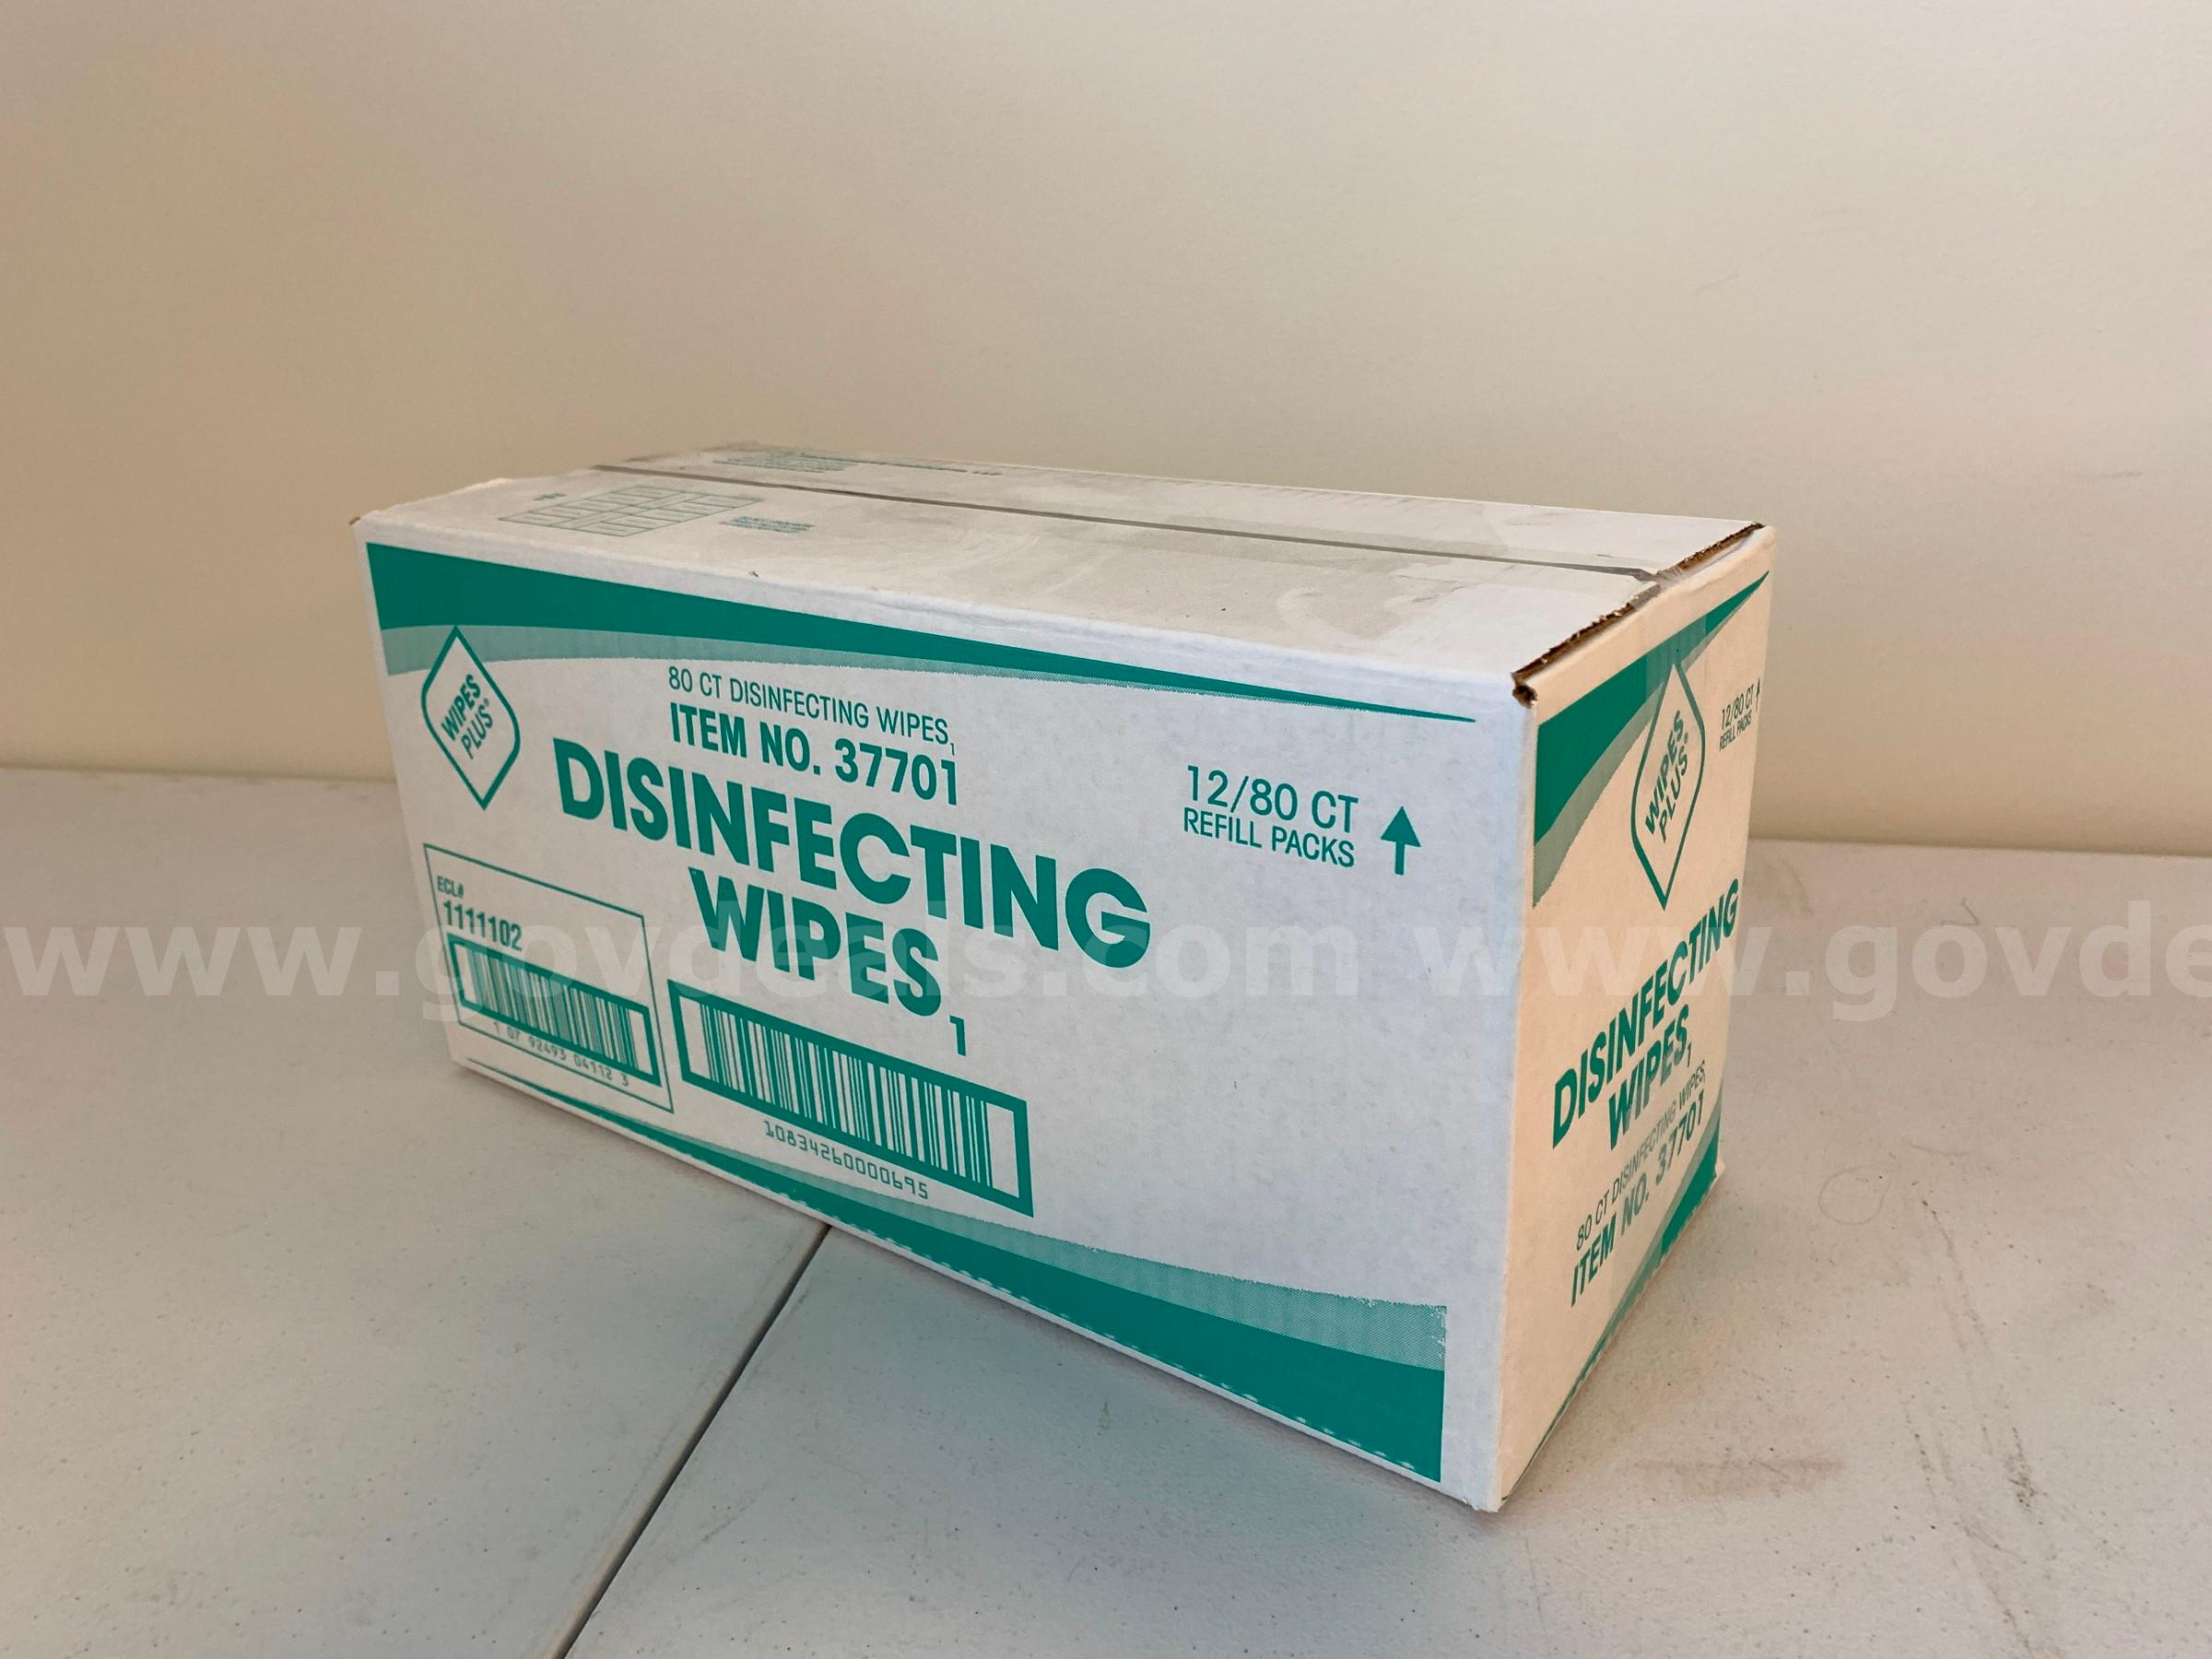 Bulk Boxes of Disinfecting Wipes